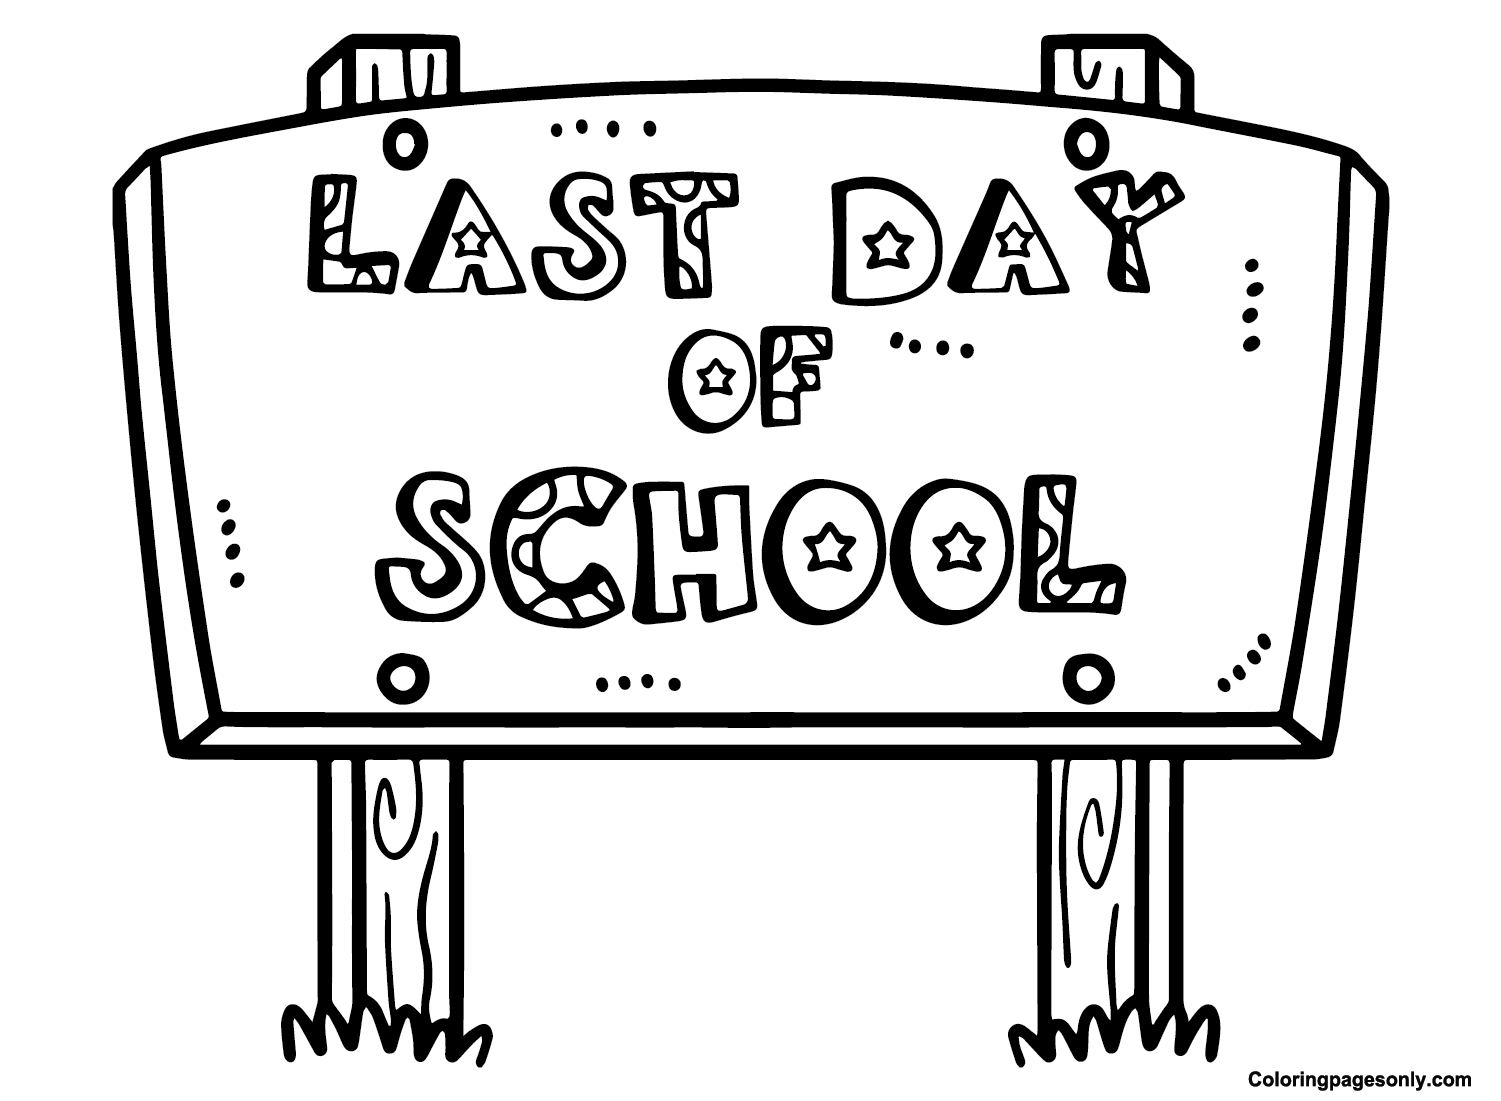 Last Day of School for Children Coloring Pages - Last Day of School ...